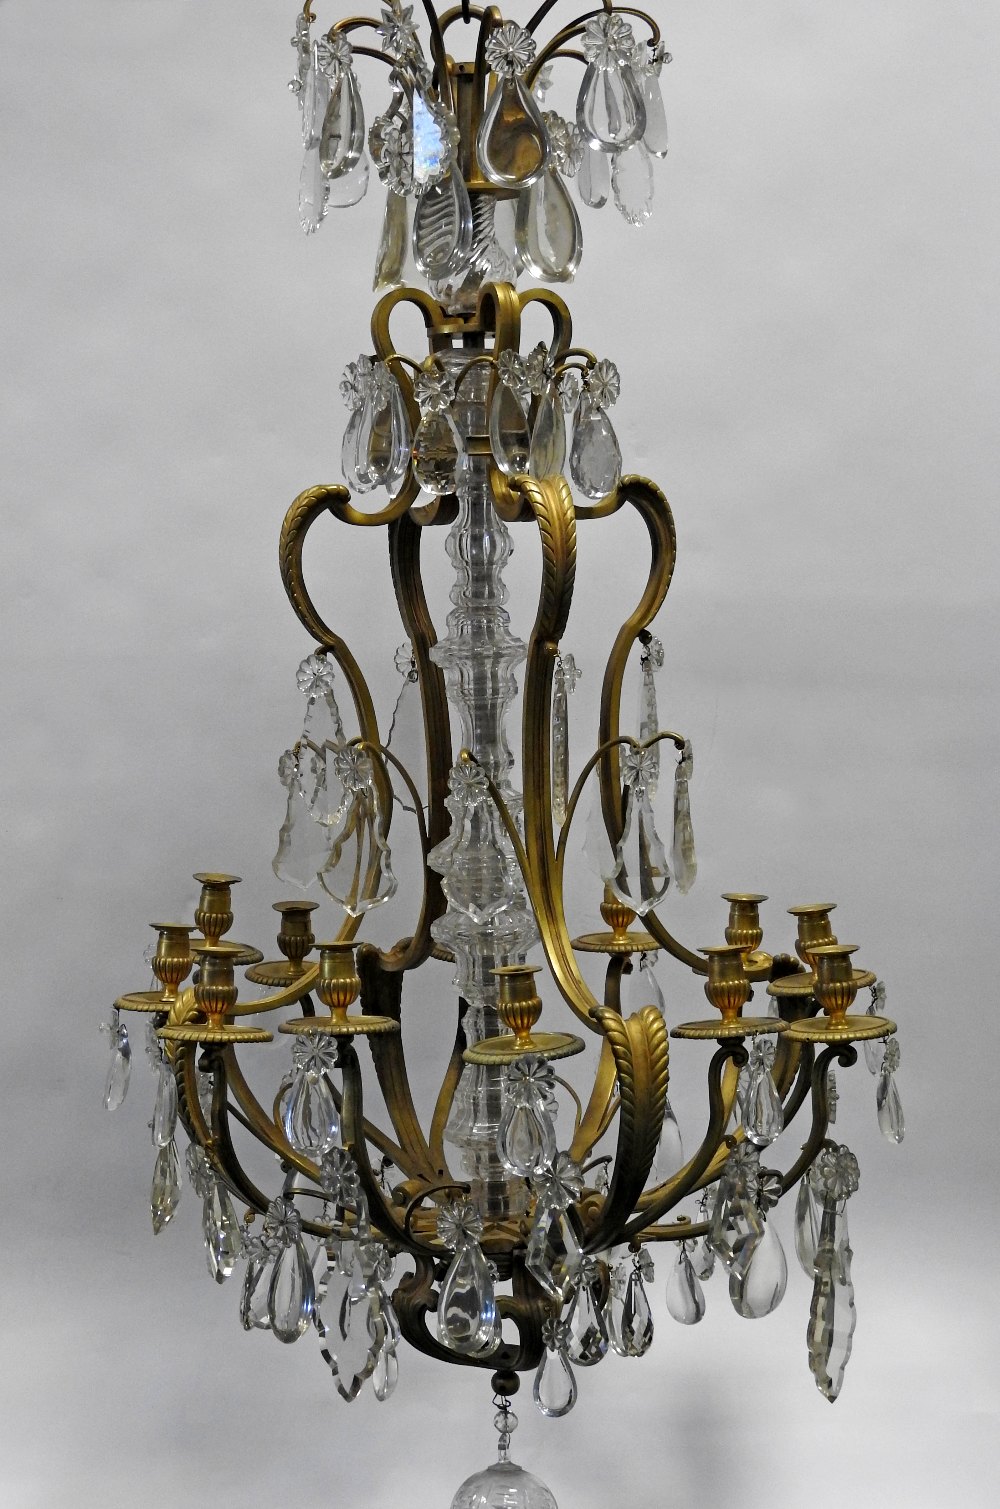 A 19th century French Ormolu and cut glass Louis XVI style twelve branch chandelier hung